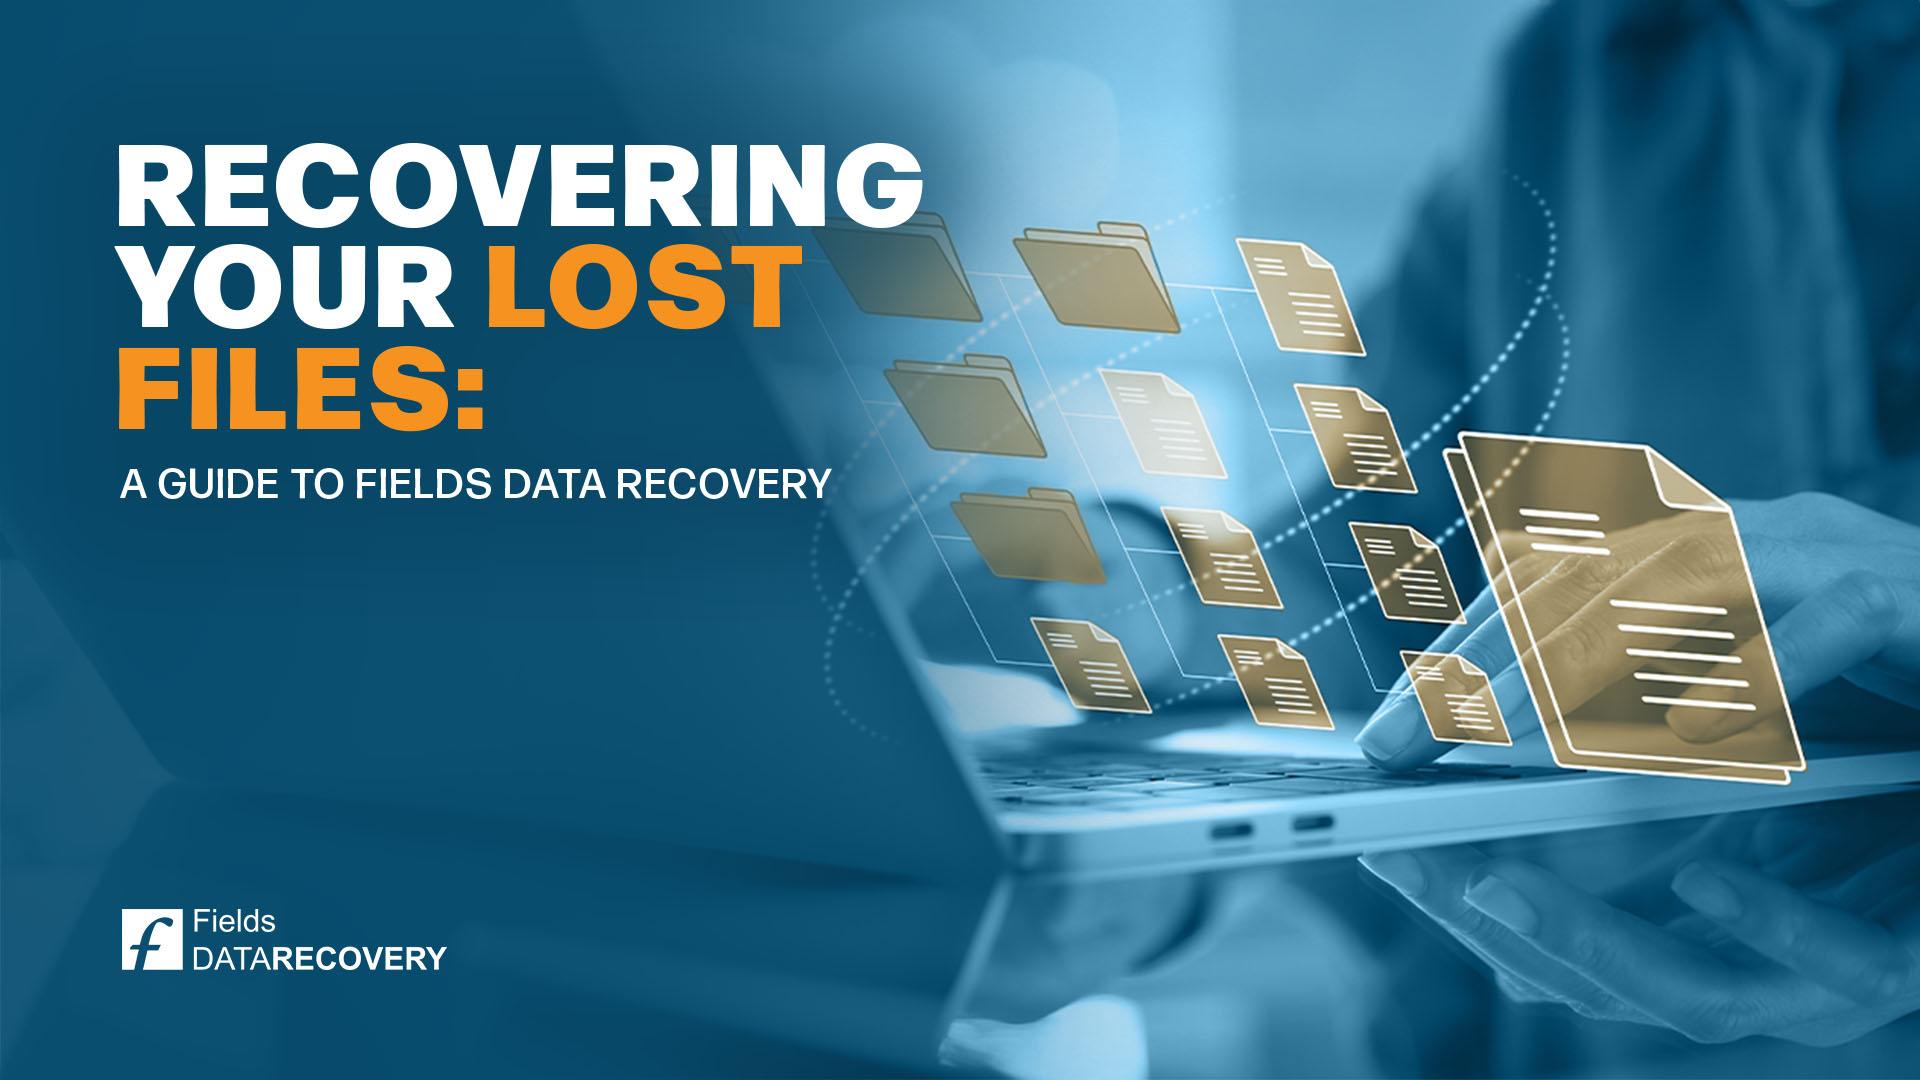 Recovering Your Lost Files: A Guide to Fields Data Recovery